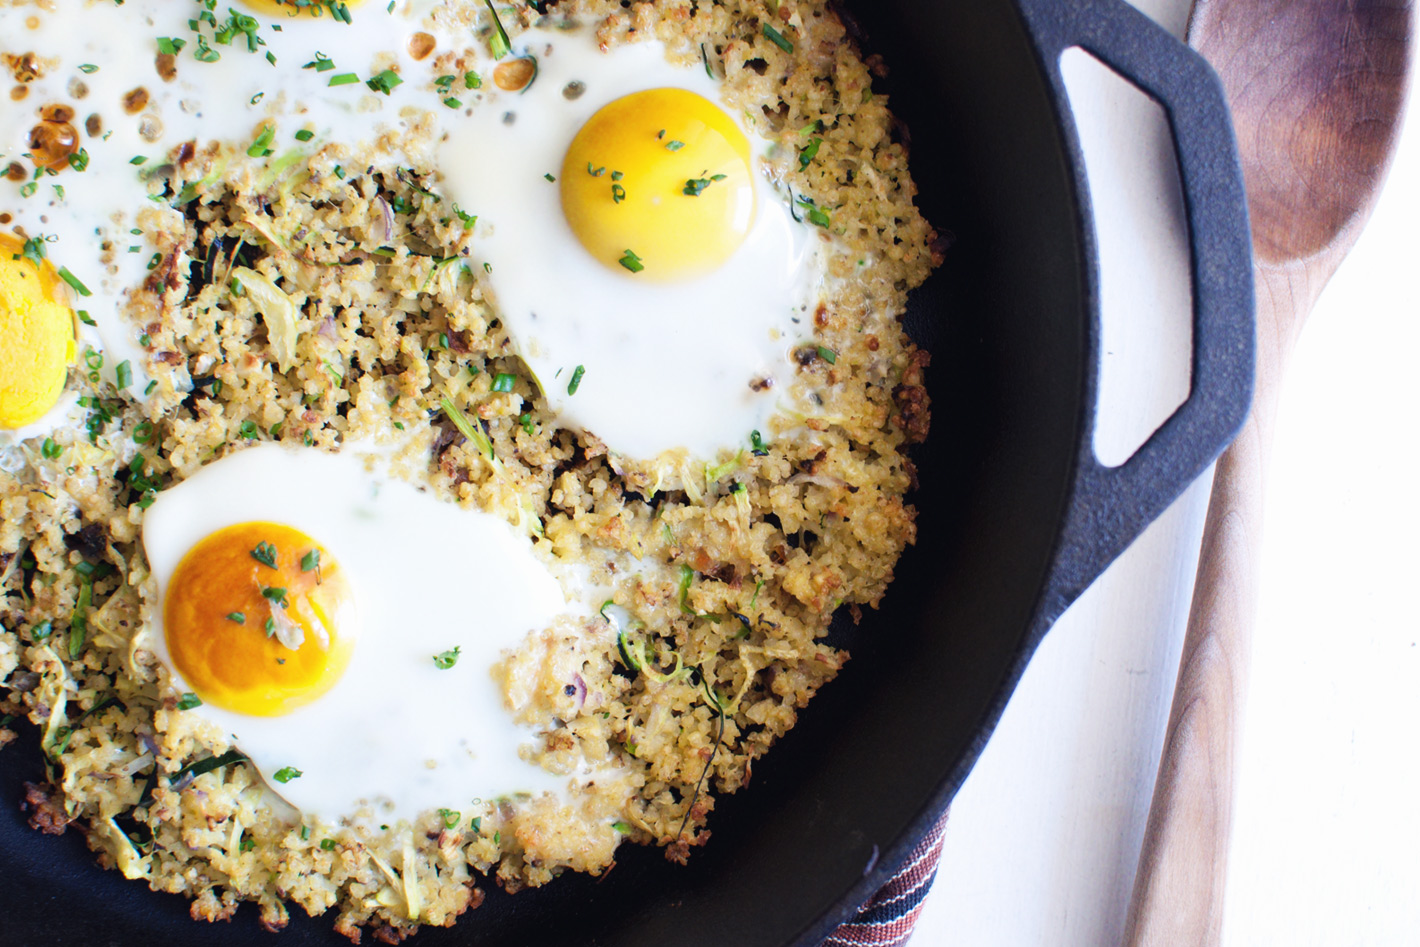 Crispy Millet Hash Browns with Sunny-Side Eggs